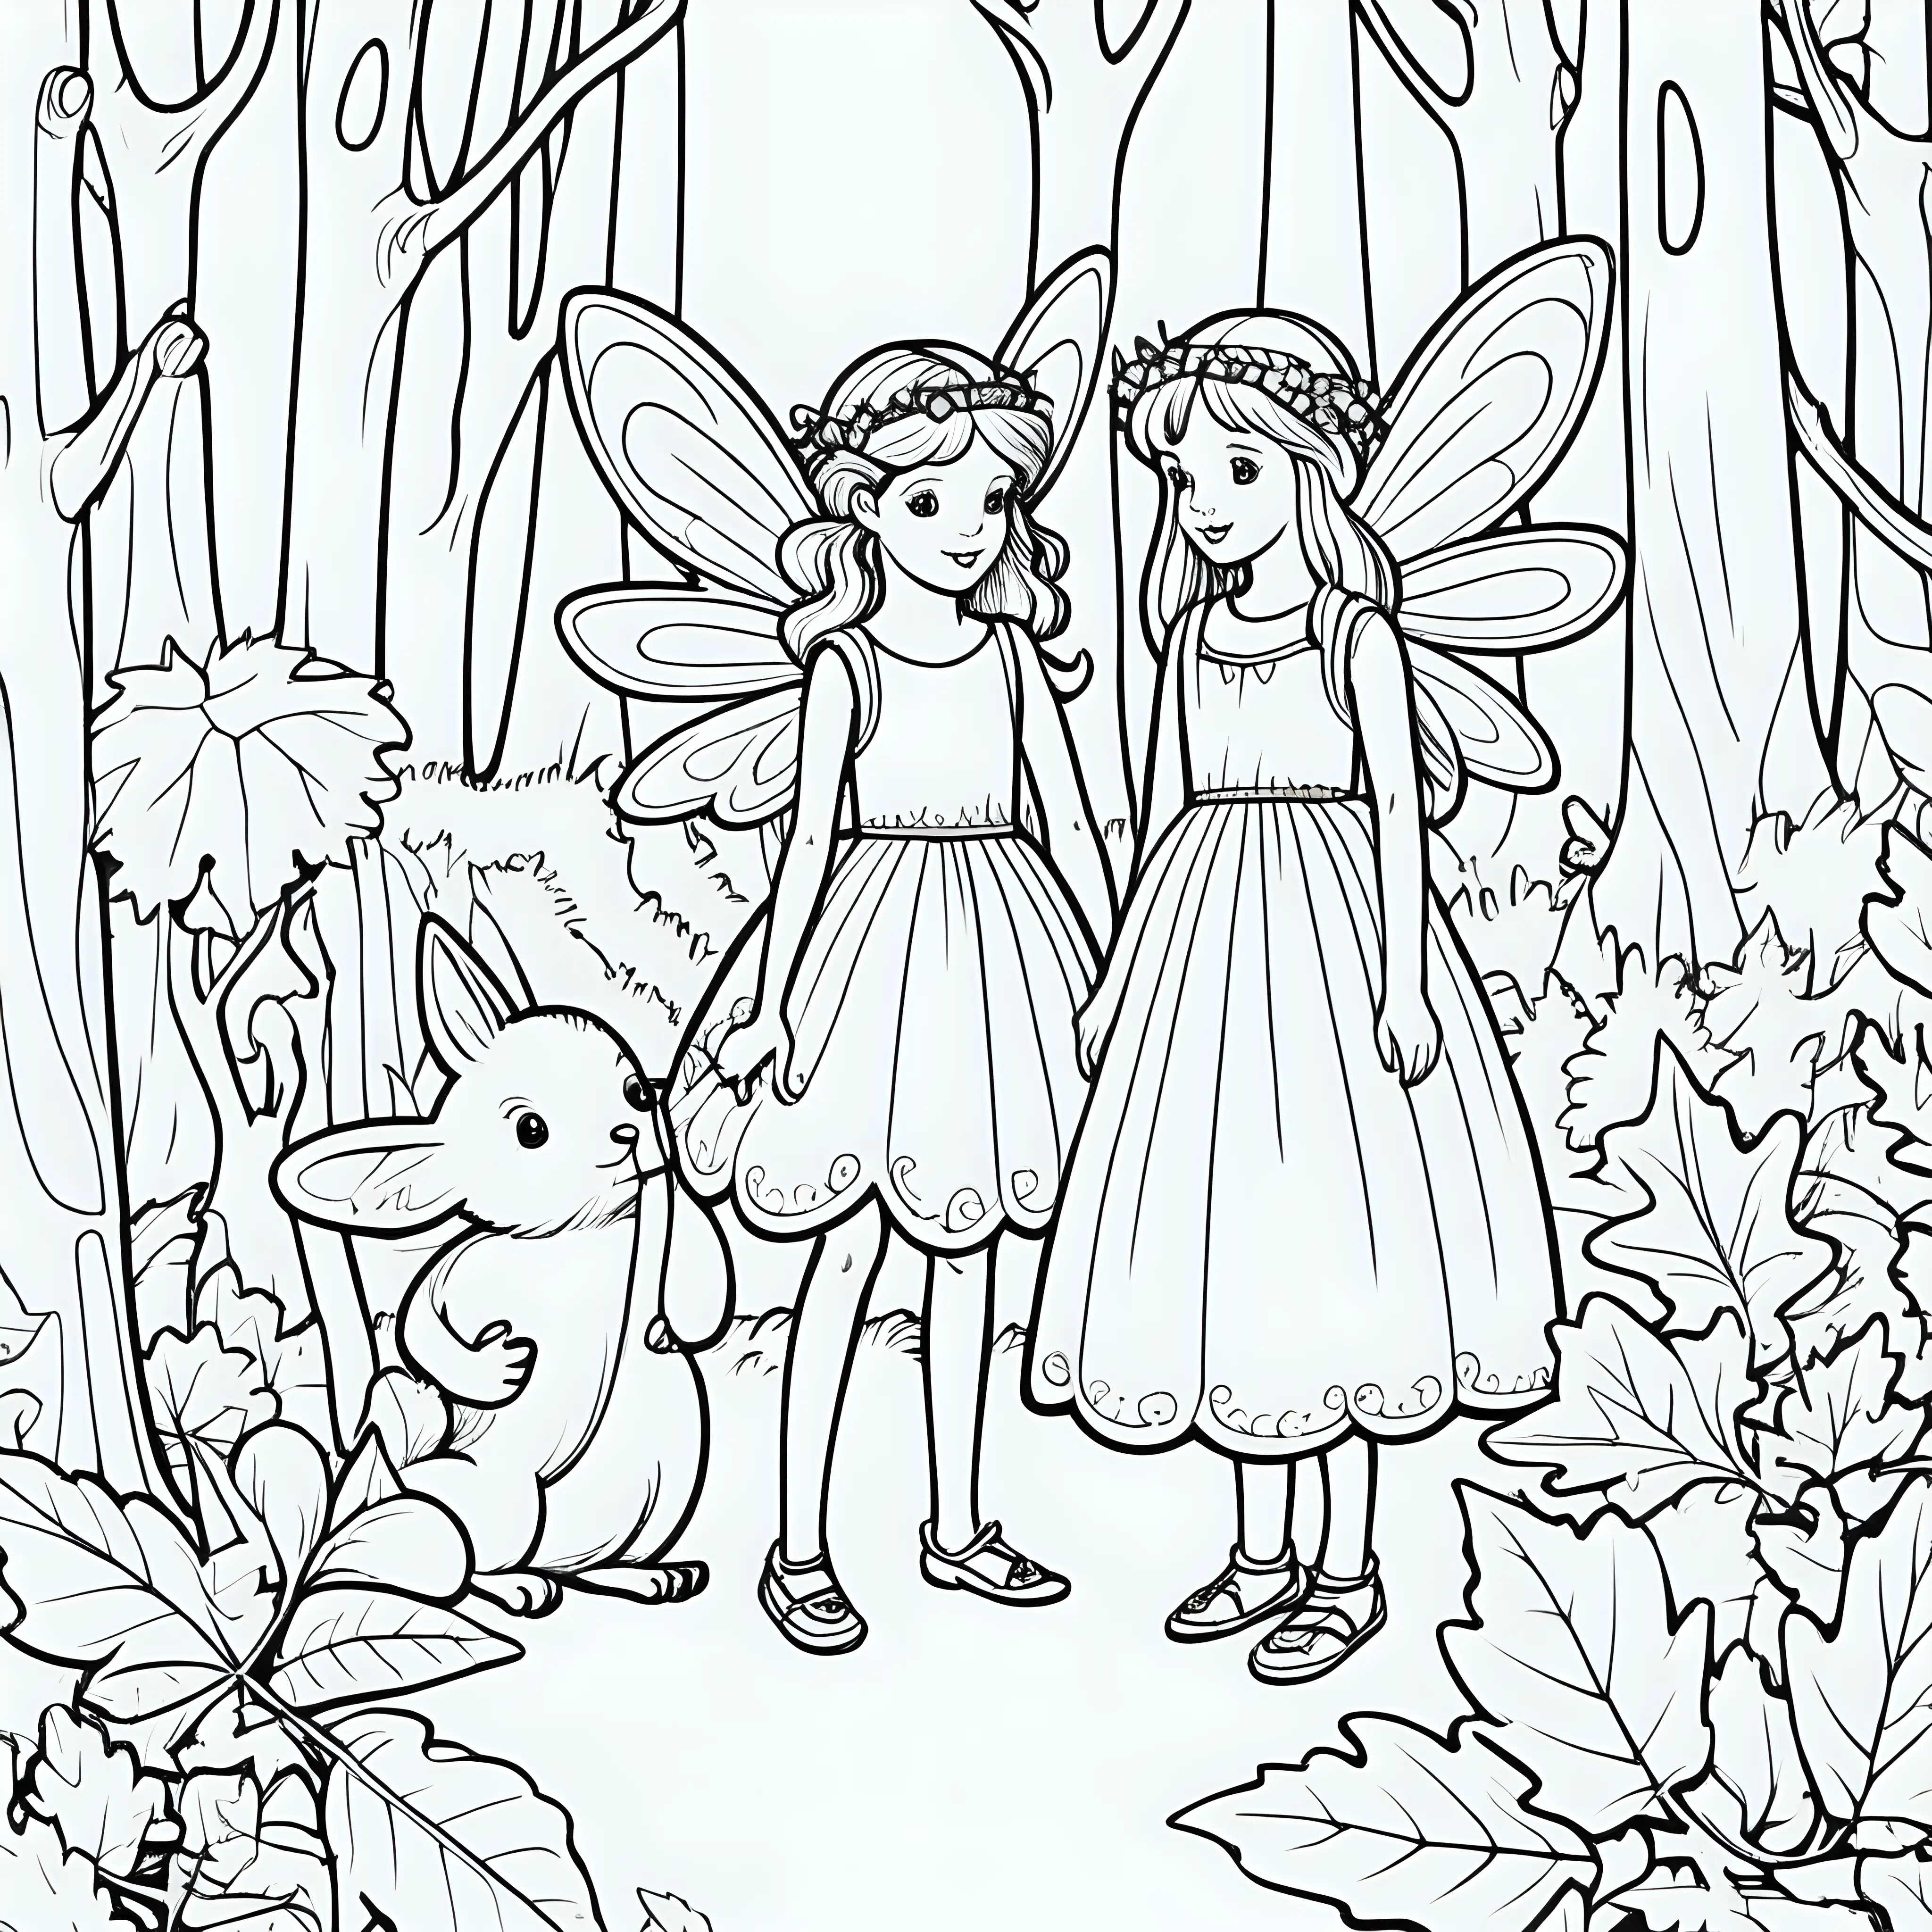 Simple black line fairy's in a woodland children's colouring page